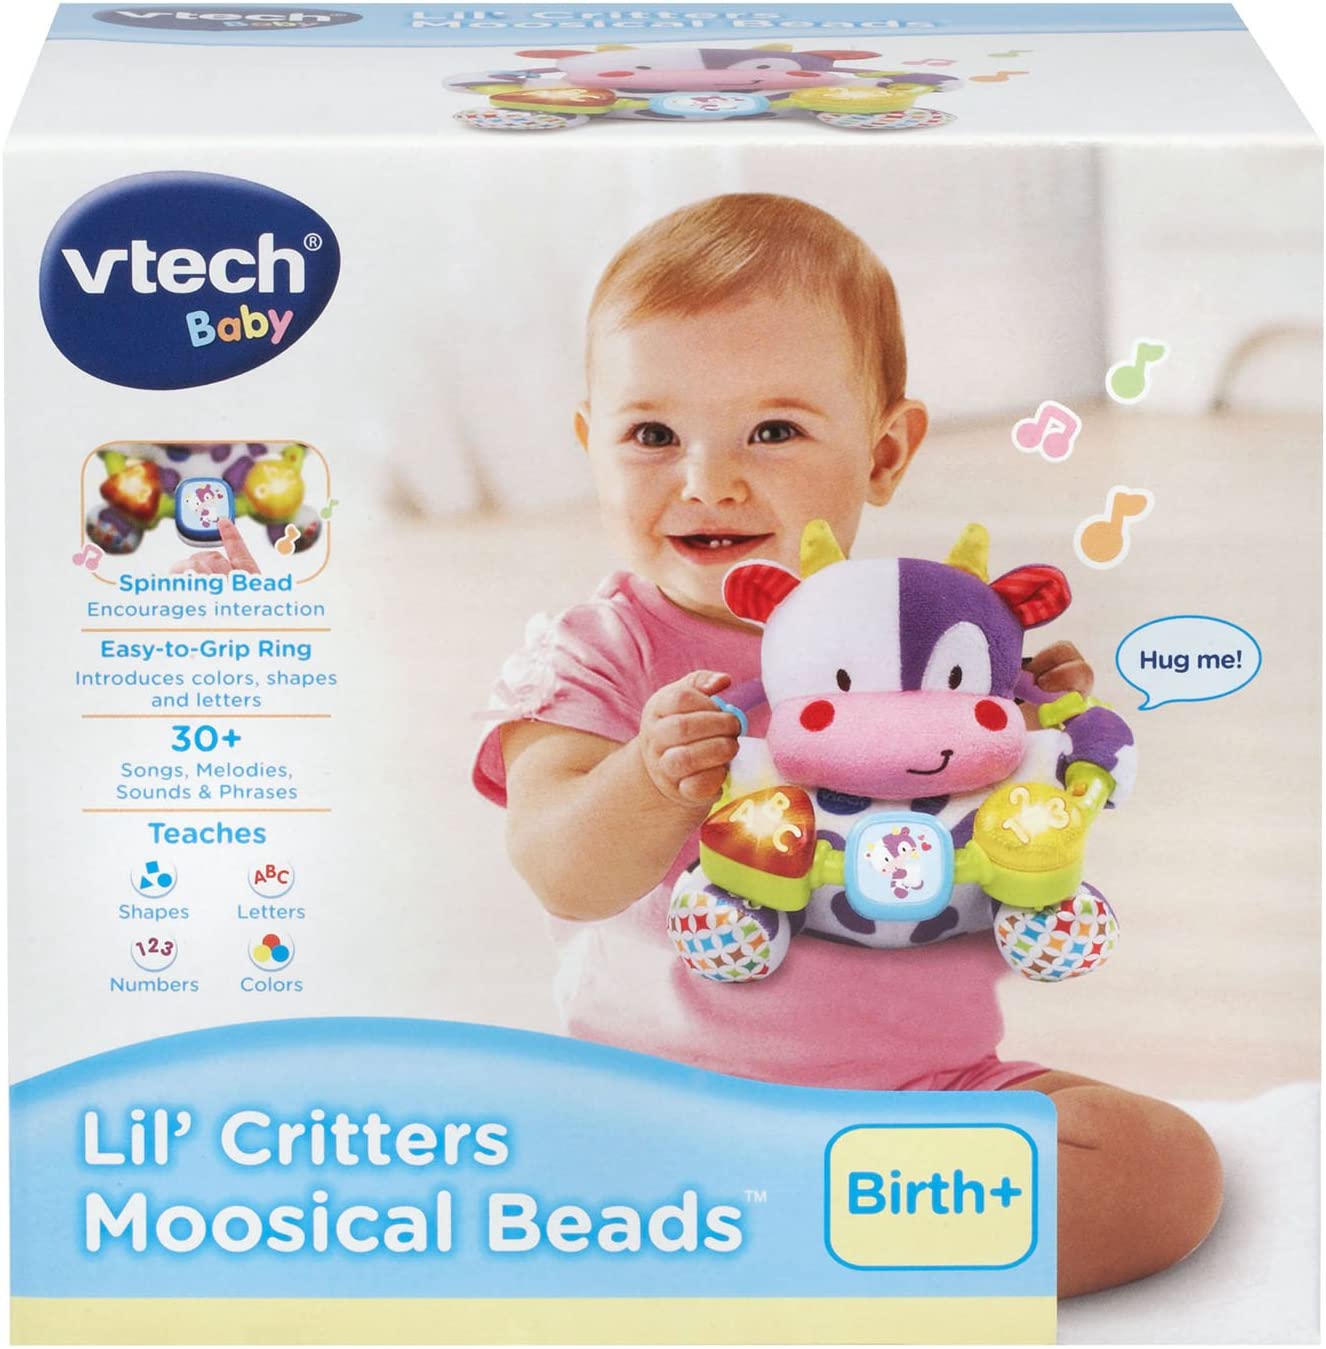 VTech Lil' Critters Moosical Beads, Purple - for Ages 0-24 Months